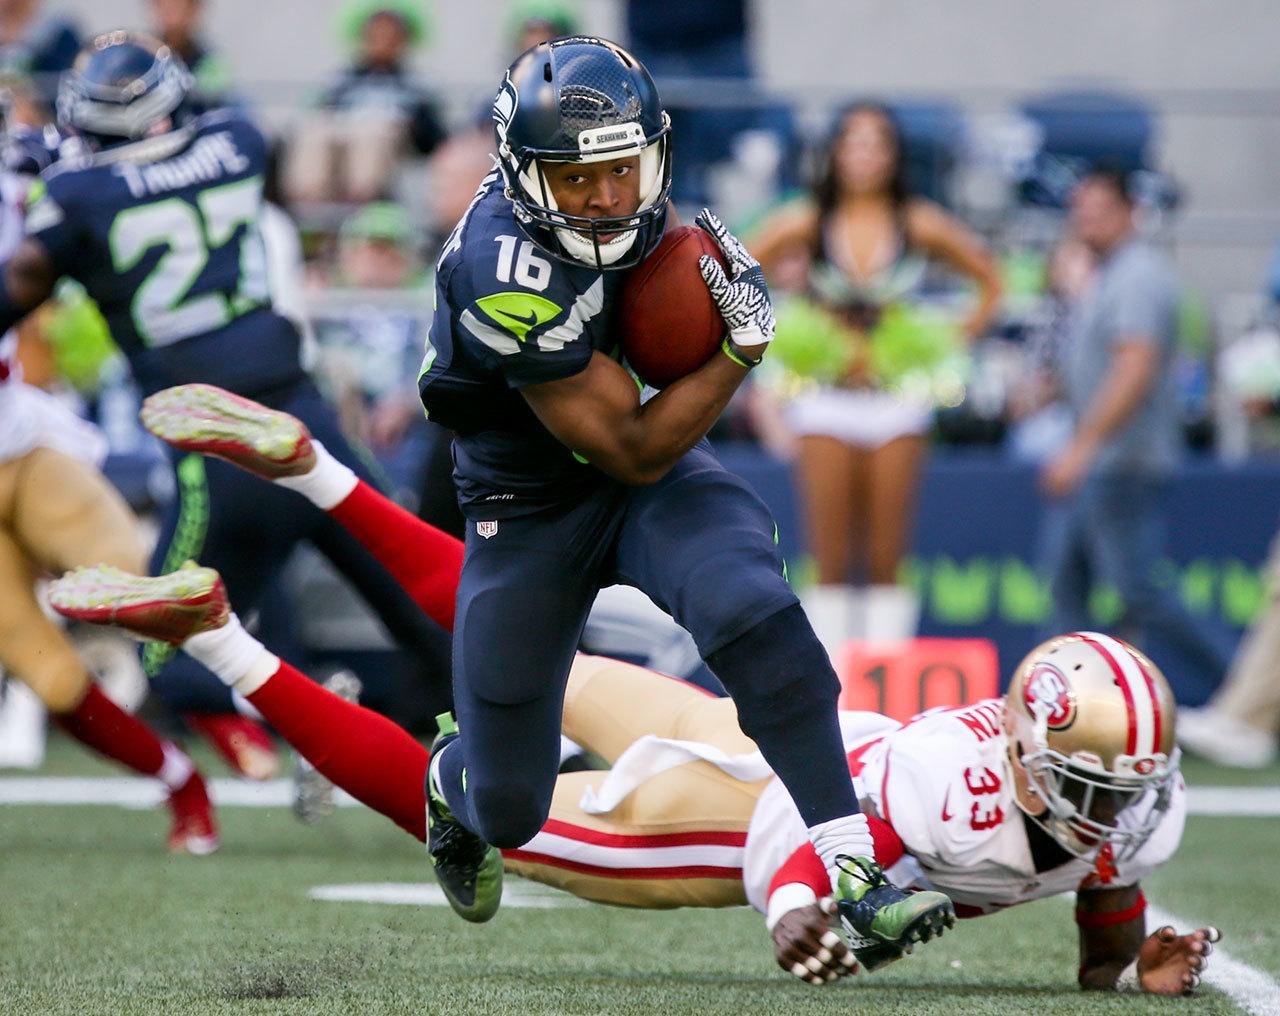 Seahawks wide receiver Tyler Lockett eludes 49ers corner back Rashard Robinson for more yards Sunday afternoon at Century Link Field in Seattle on September 25, 2016. The Seahawks are 2-1 after defeating the 49ers 37-18. (Kevin Clark / The Herald)